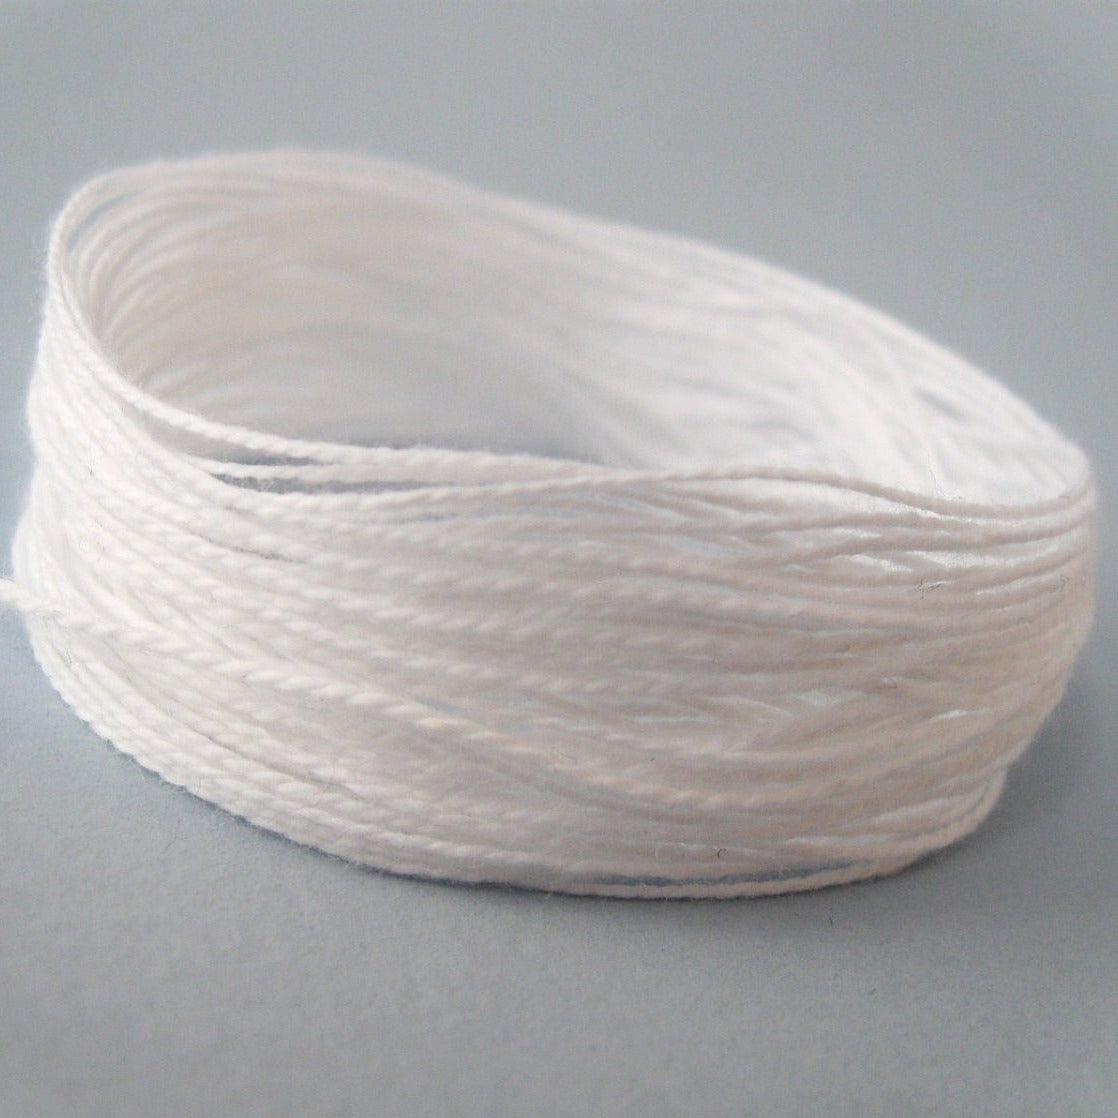 White Organic Cotton Cord 0.7mm - 10 meters/32.8 ft